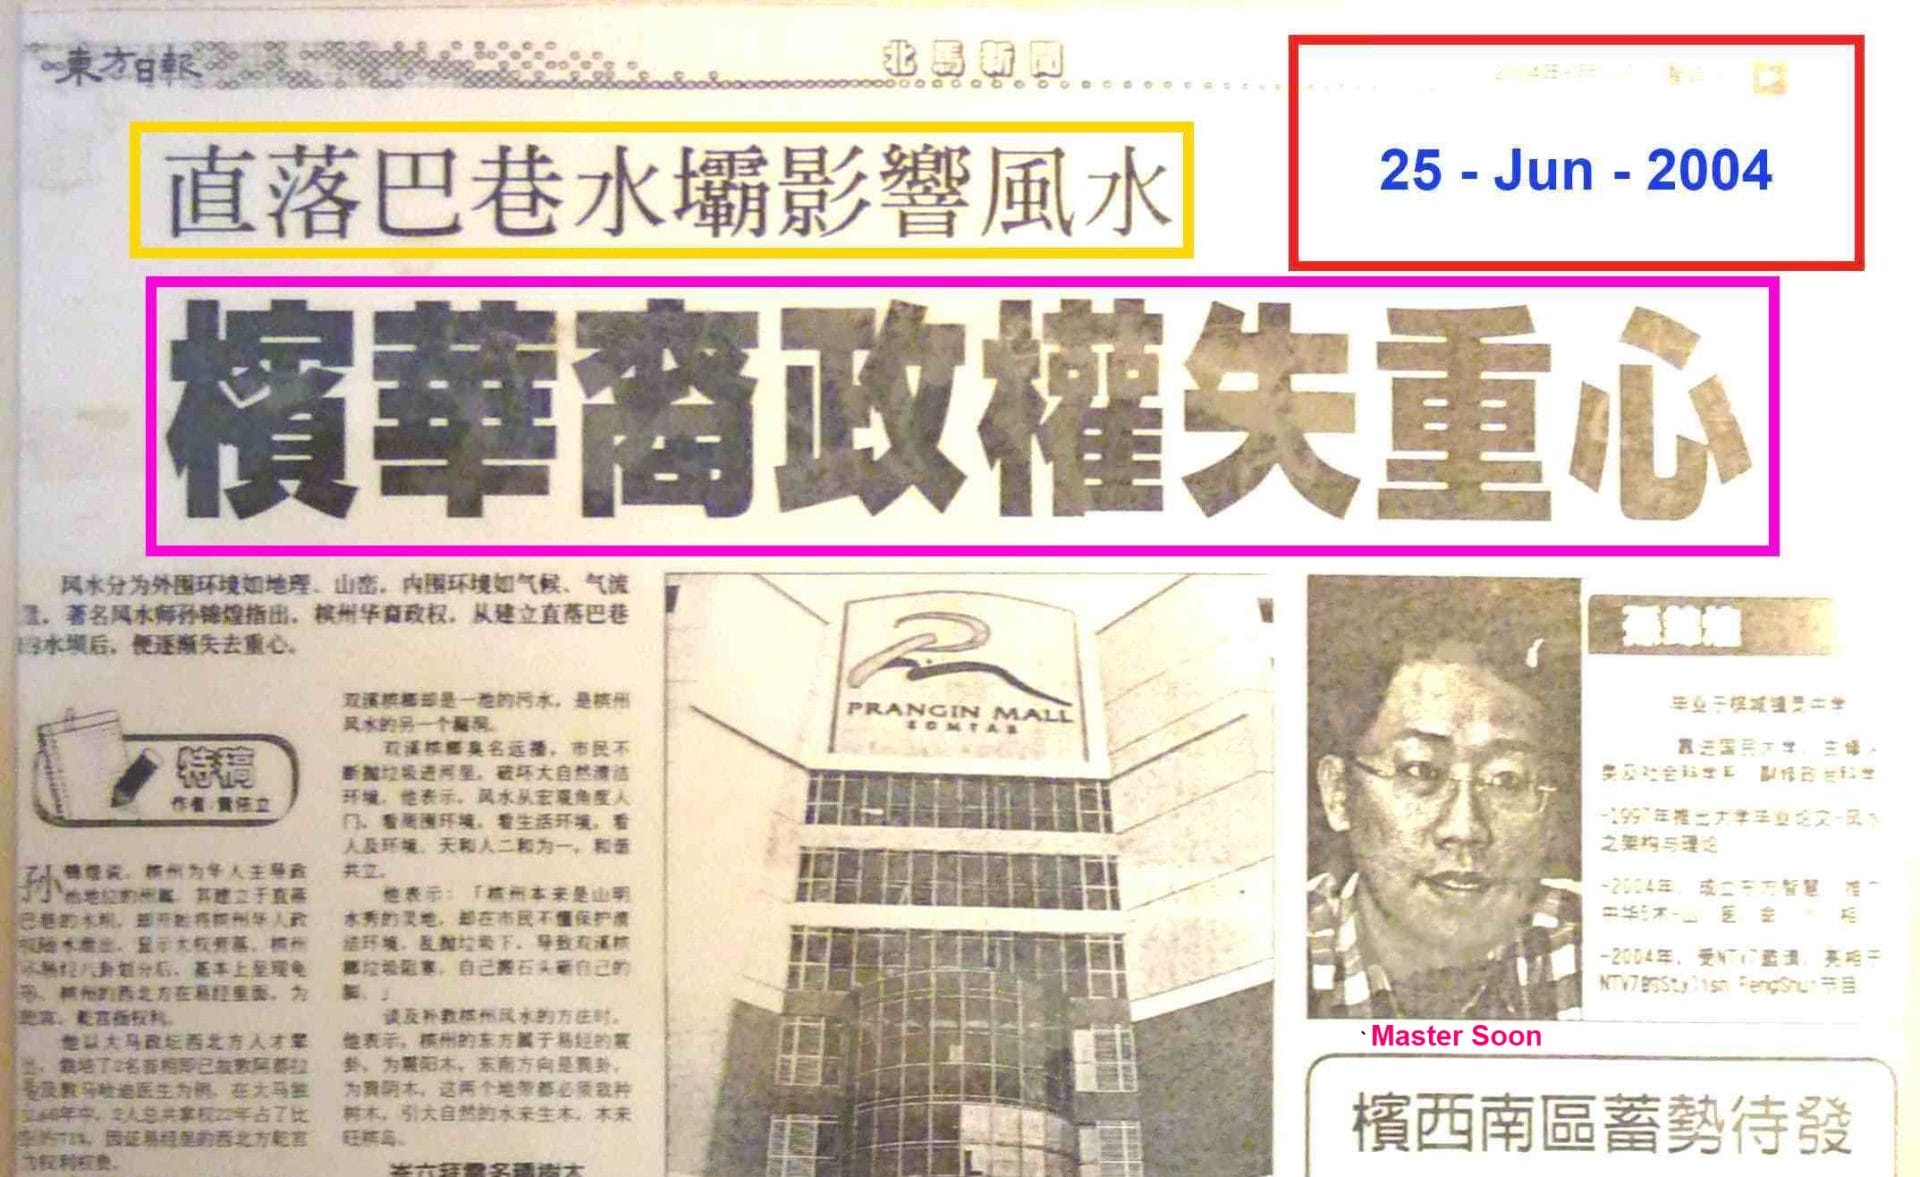 Former Penang Chief Minister Constructed Teluk Bahang Dam; the Feng Shui of the Dam Made Him Down Fall in 2008. Master Soon Had Predicted This in year 2004. 前任槟城州首席部长(省长) 建设次水坝；然而其风水却造成2008年垮台。孙老师早于2004年就预测此事。前任槟城州首席部长(省长) 建设次水坝；然而其风水却造成2008年垮台。孙老师早于2004年就预测此事。